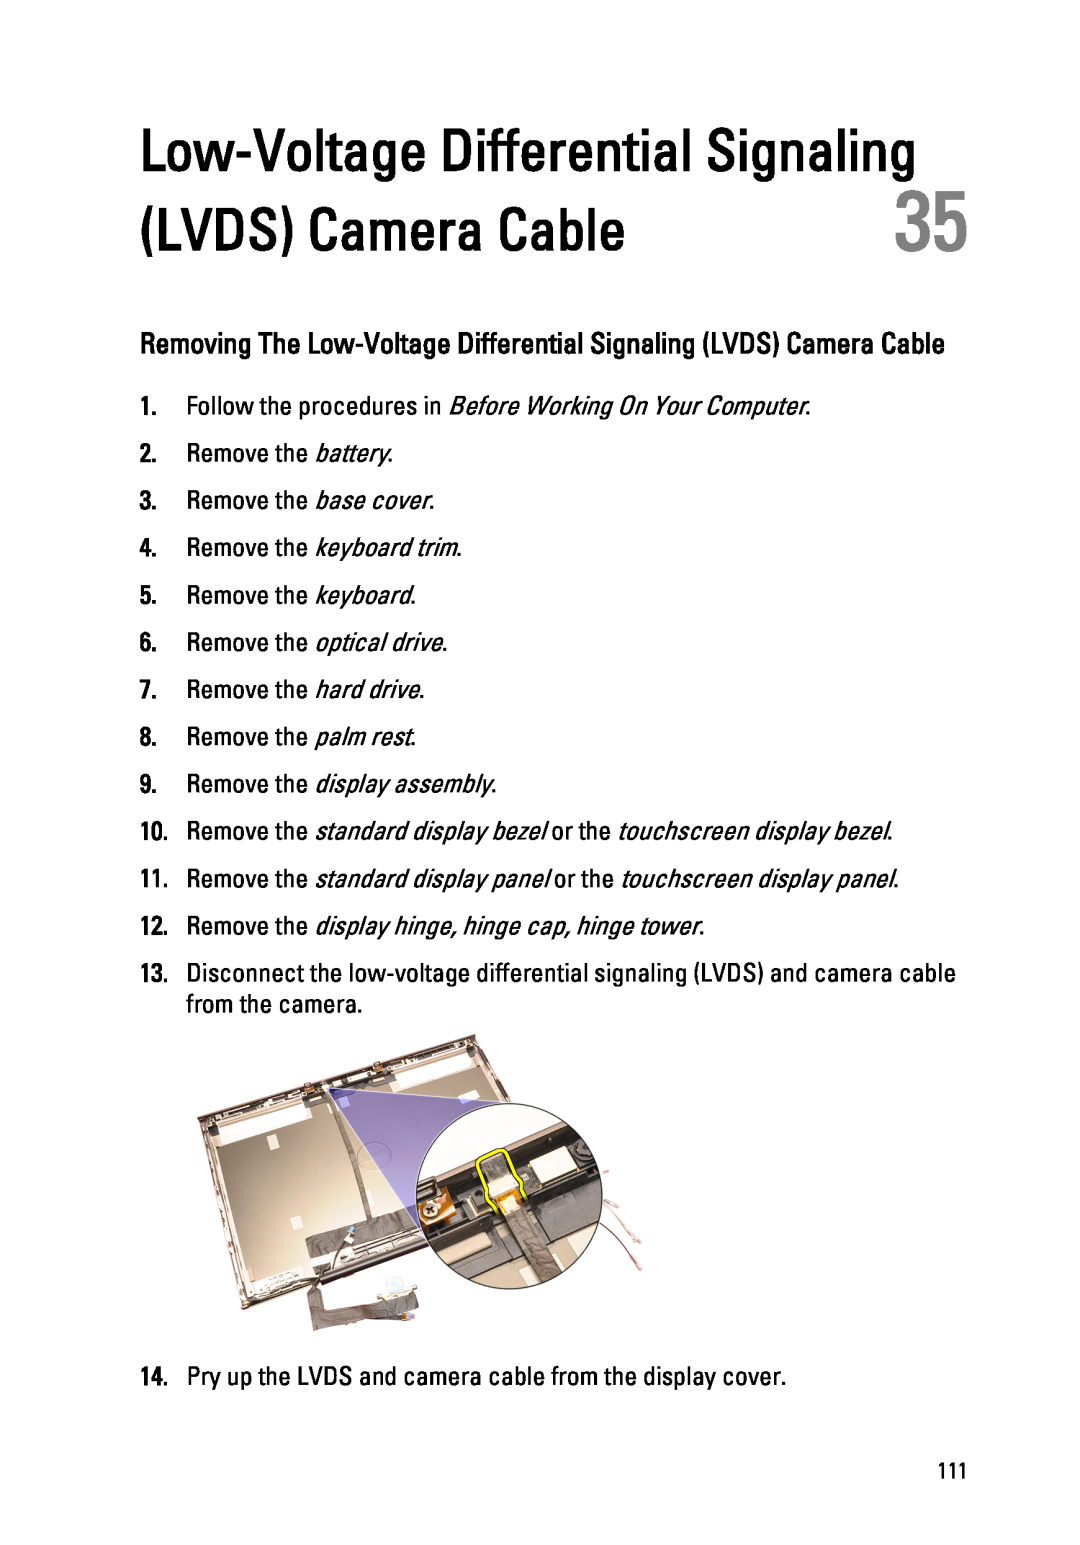 Dell M4600 owner manual Removing The Low-Voltage Differential Signaling LVDS Camera Cable, Remove the keyboard trim 